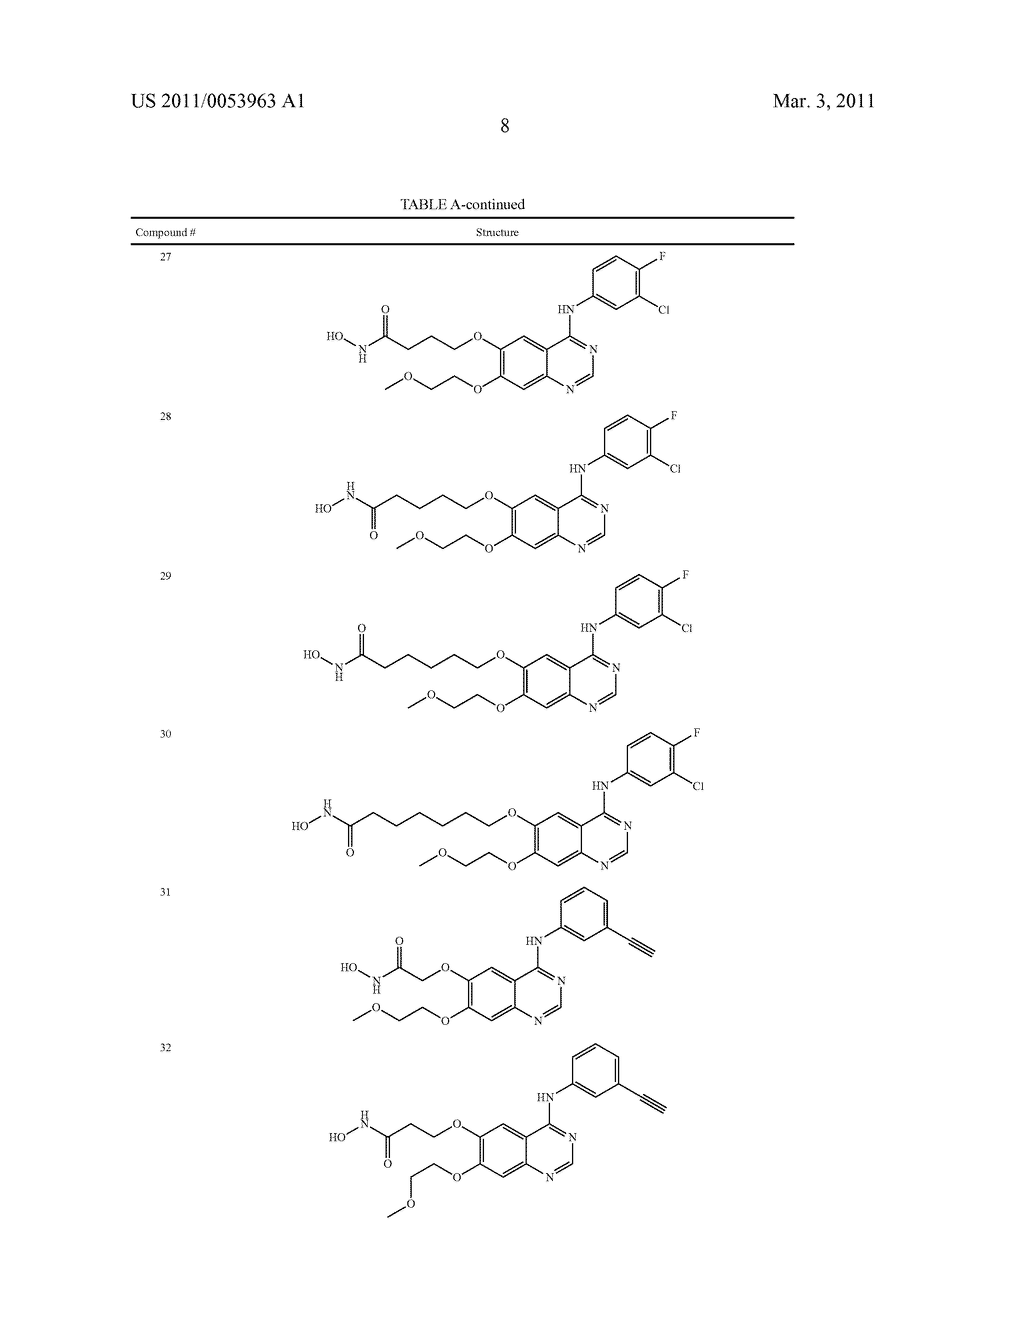 TARTRATE SALTS OF QUINAZOLINE BASED EGFR INHIBITORS CONTAINING A ZINC BINDING MOIETY - diagram, schematic, and image 29